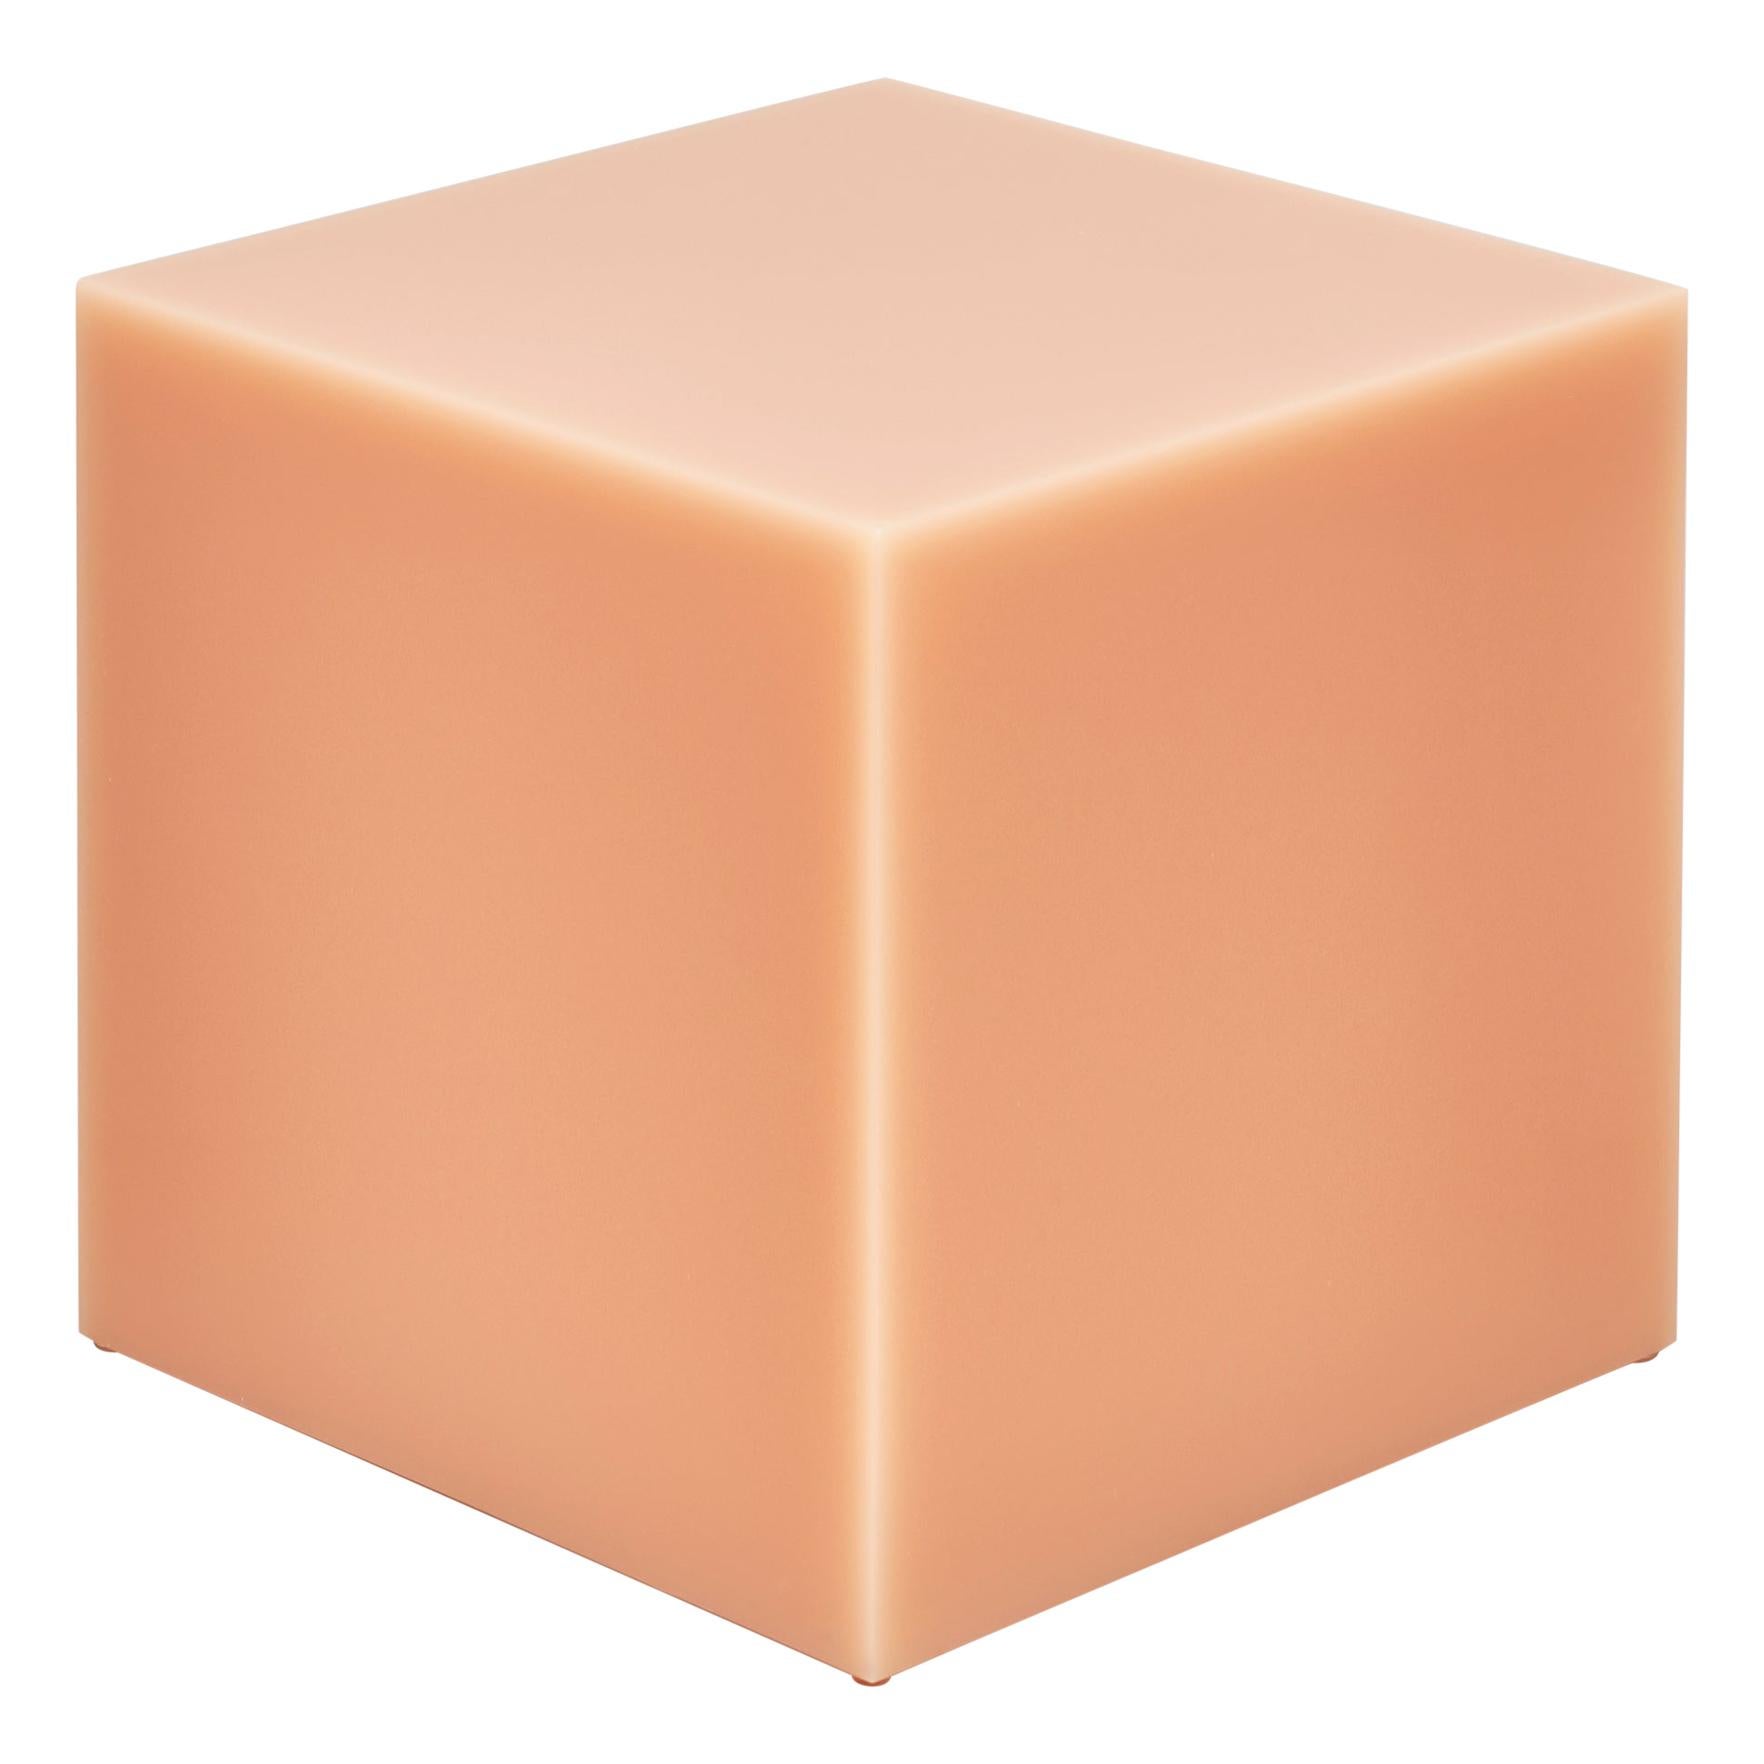 Contemporary Resin Side Table Bedside Table, Sabine Marcelis Candy Cube, Peach